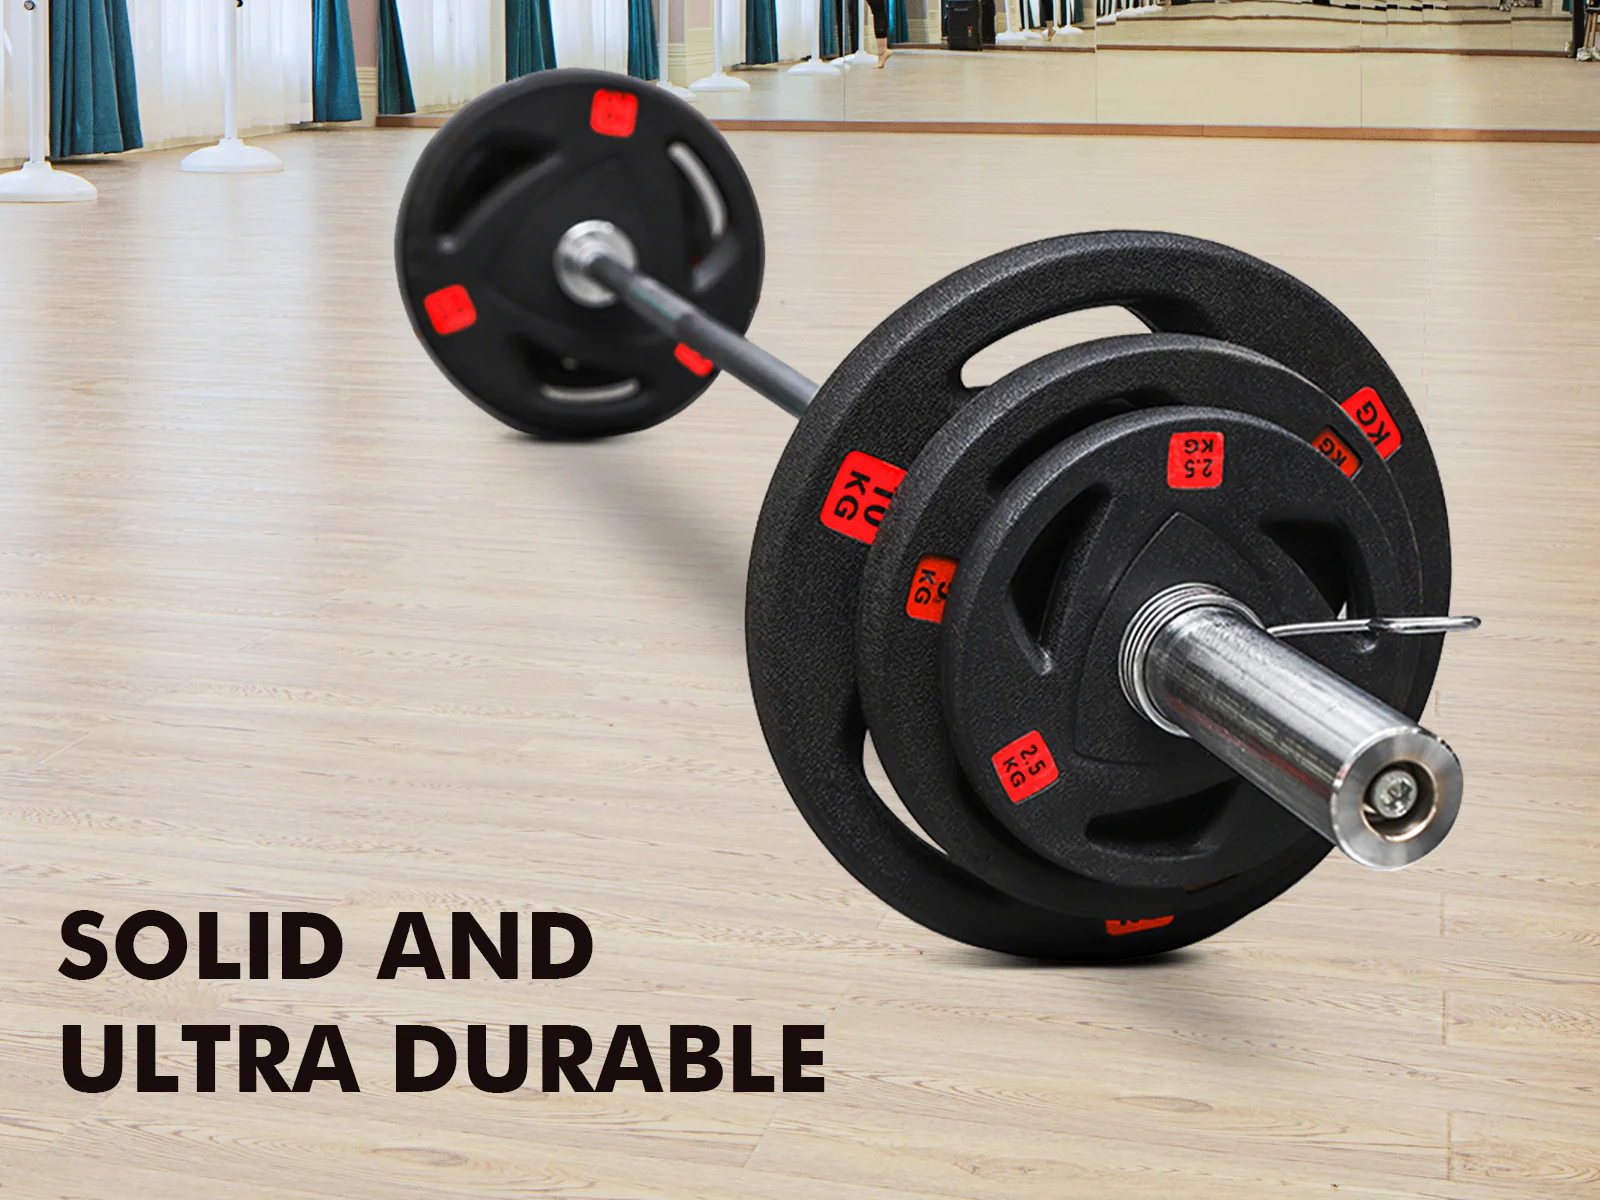 Miracle Fitness Tri-Grip Olympic Rubber Plates 20kg